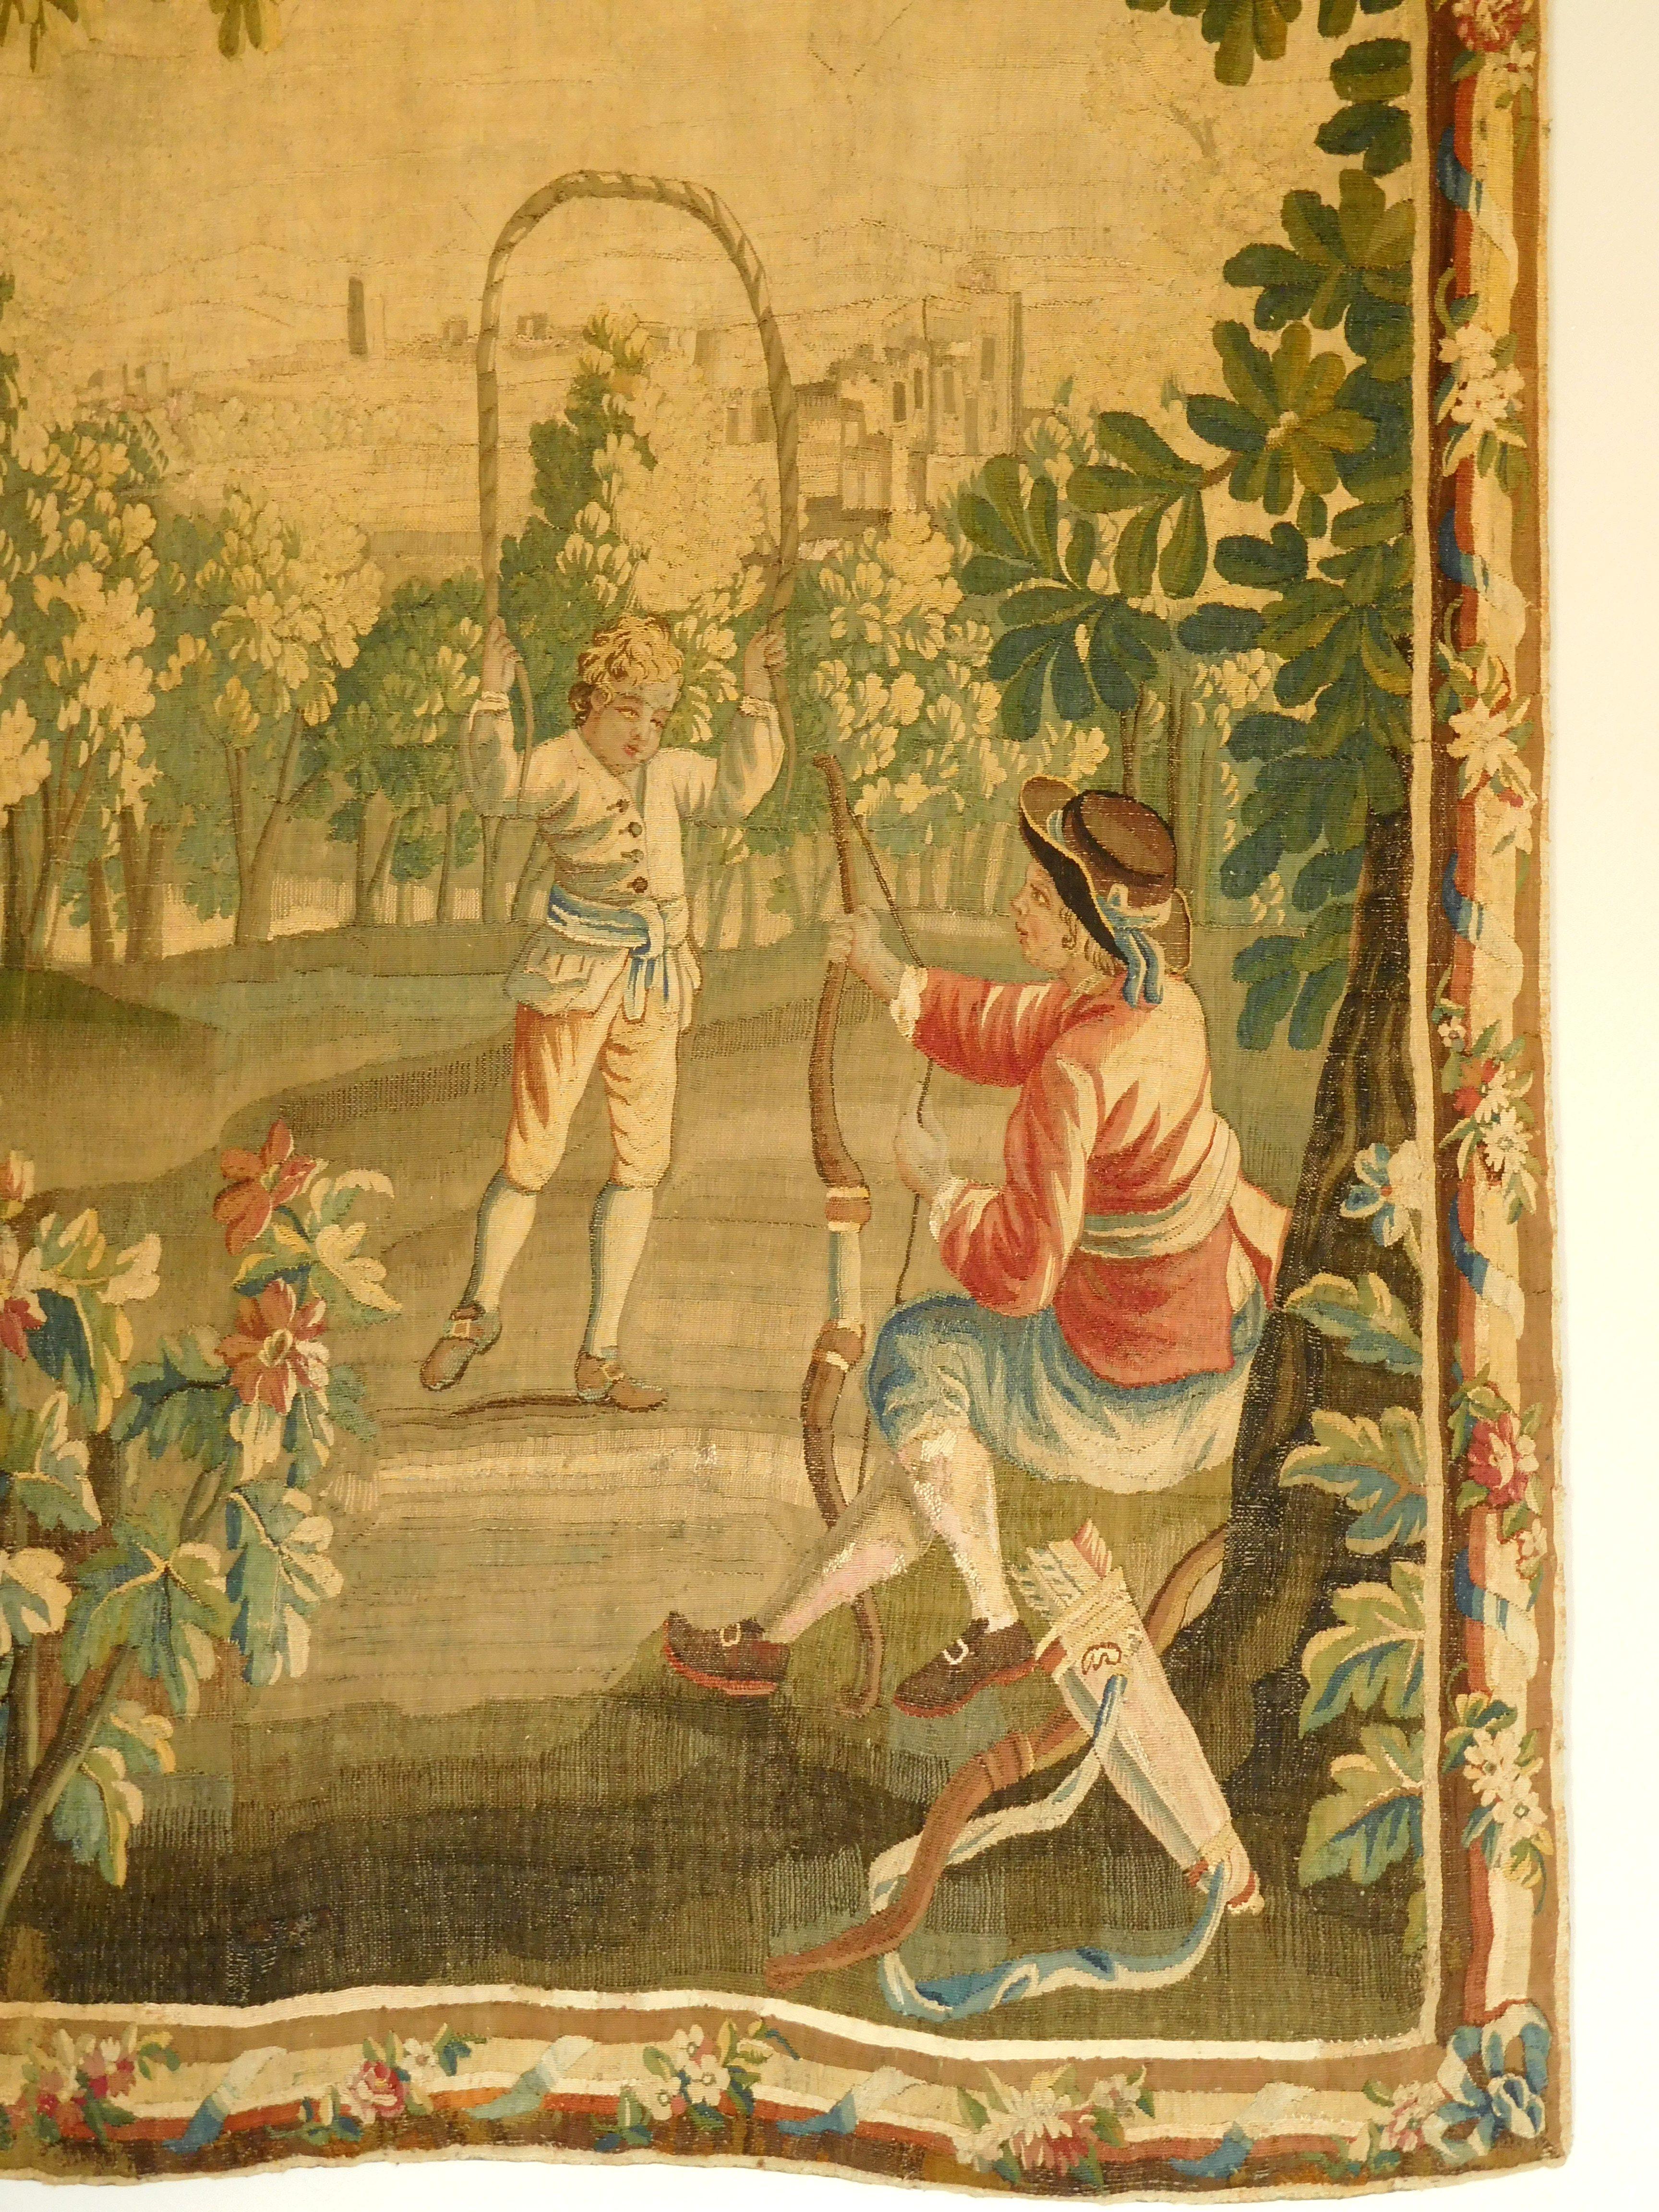 Charming wool and silk tapestry - 18th century production (Louis XVI period circa 1780) attributed to Aubusson Manufacture.

It pictures two young boys playing in the gardens : one is doing archery and the other one is playing skipping rope, the